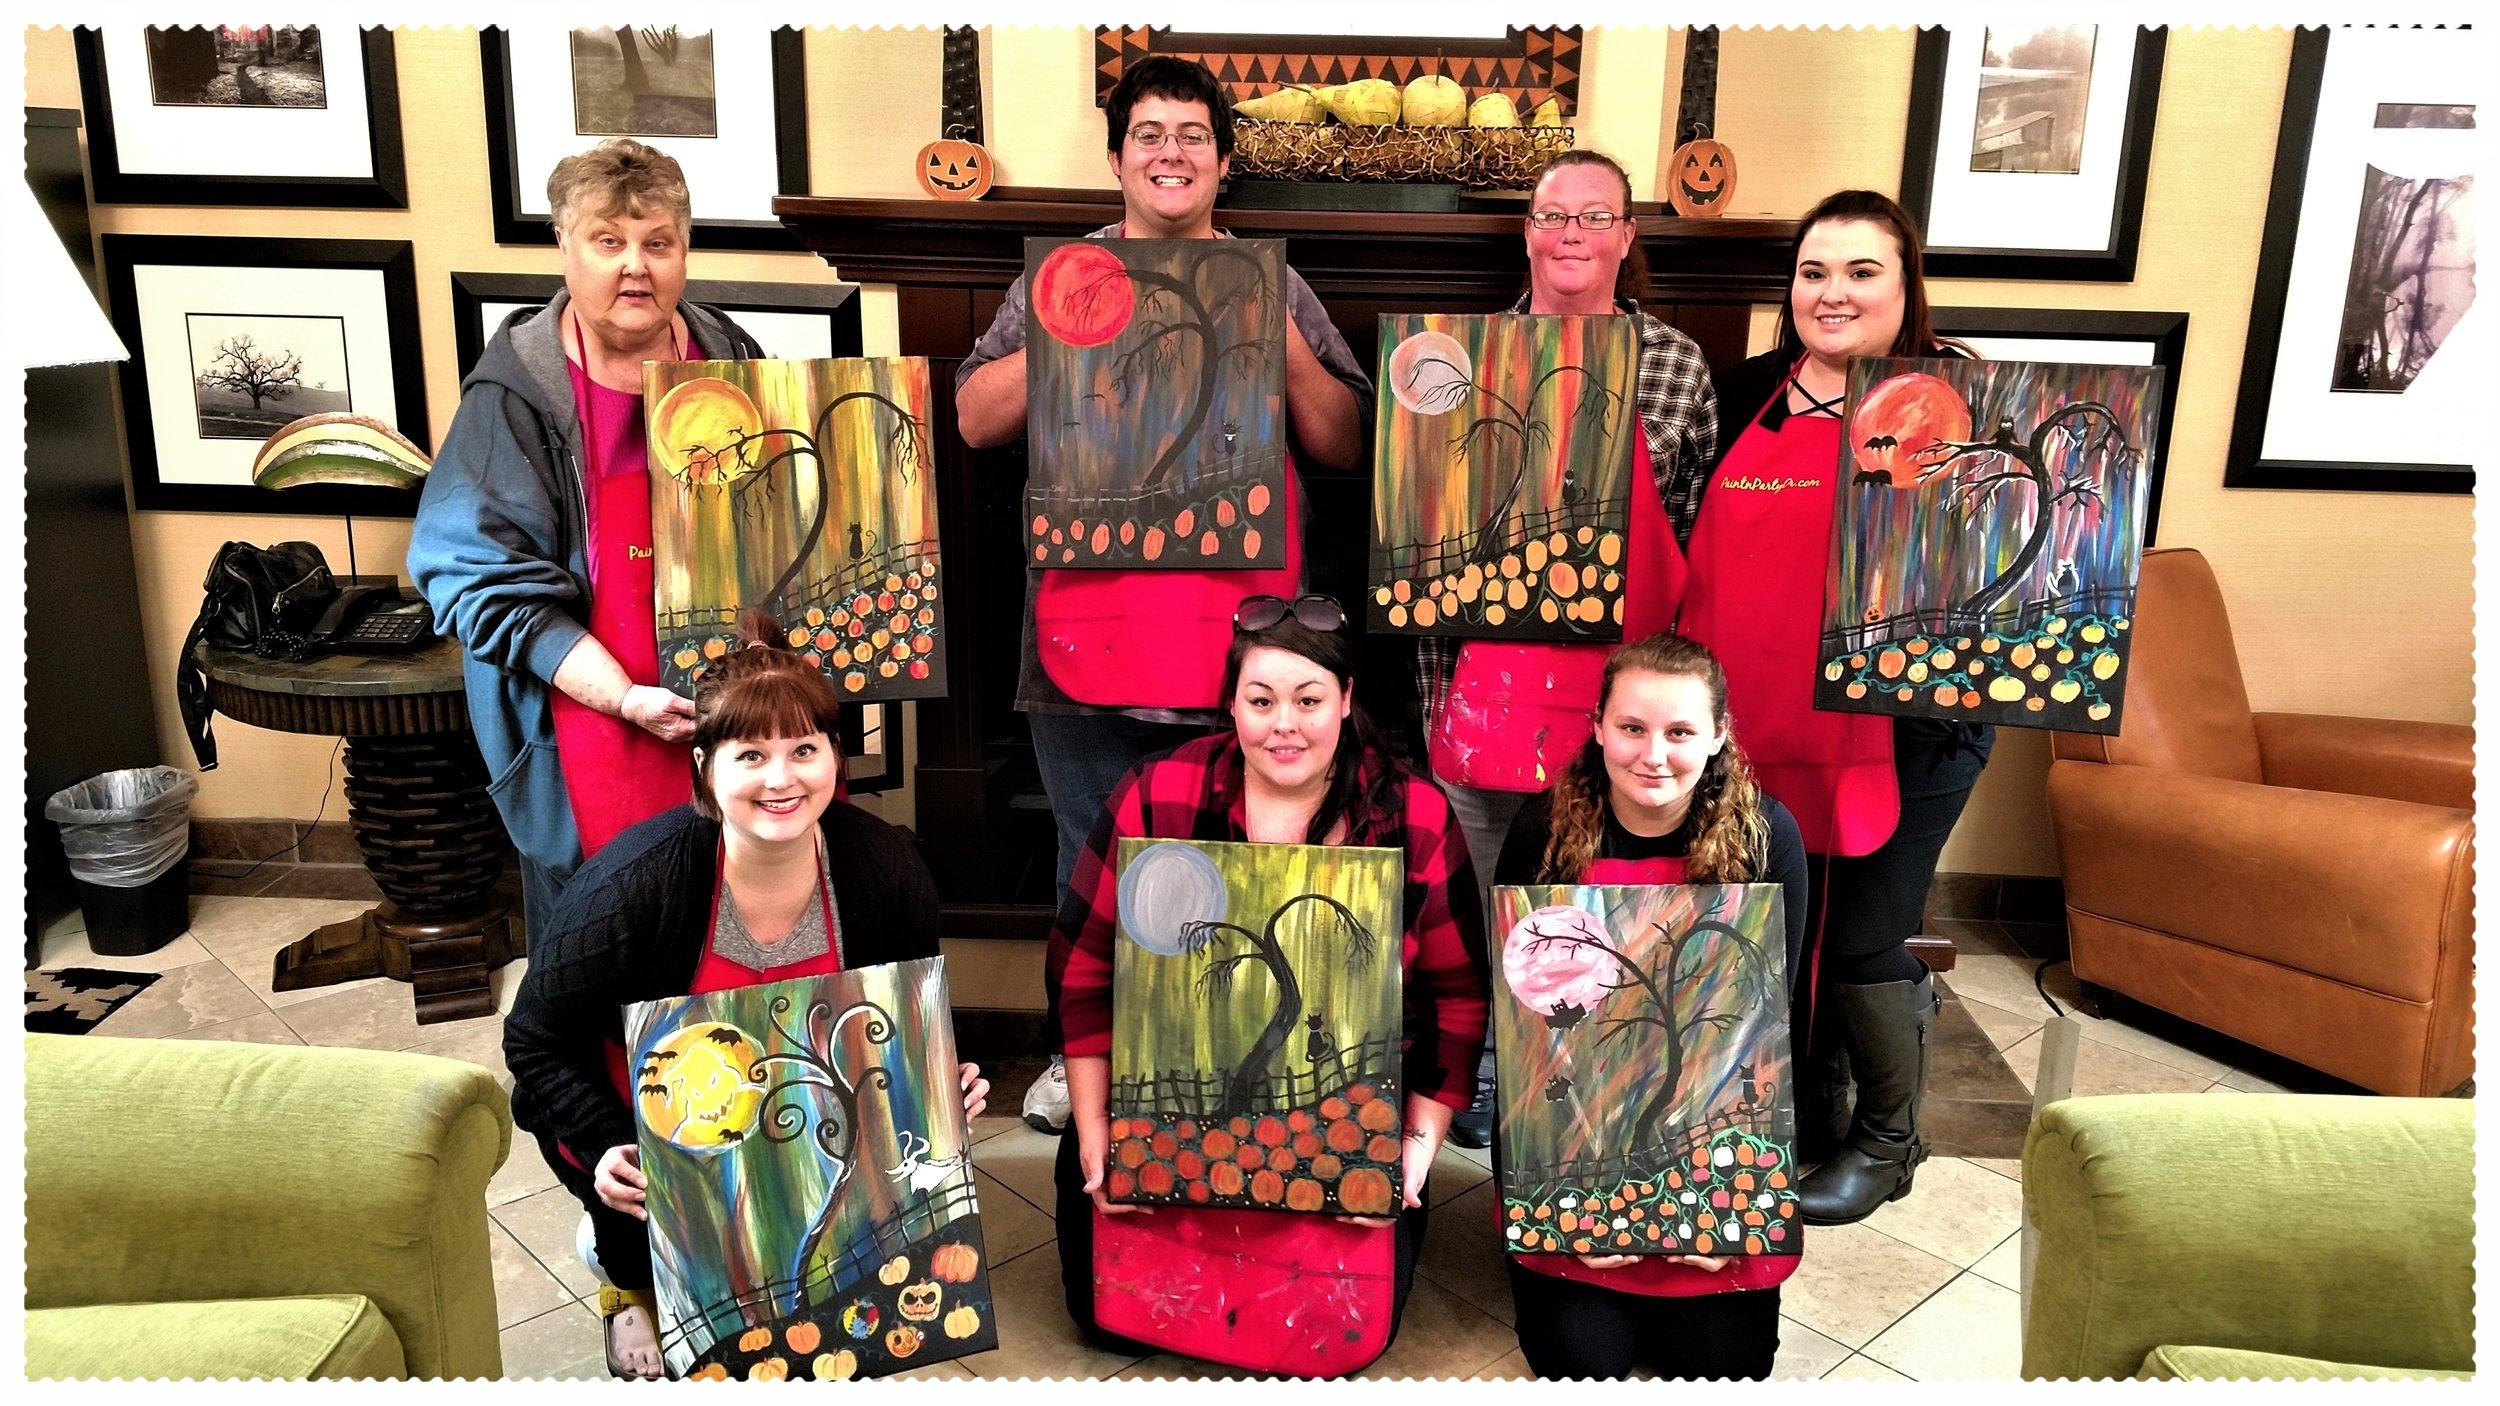 Team Building Painting Party, Phoenix Inn, Albany